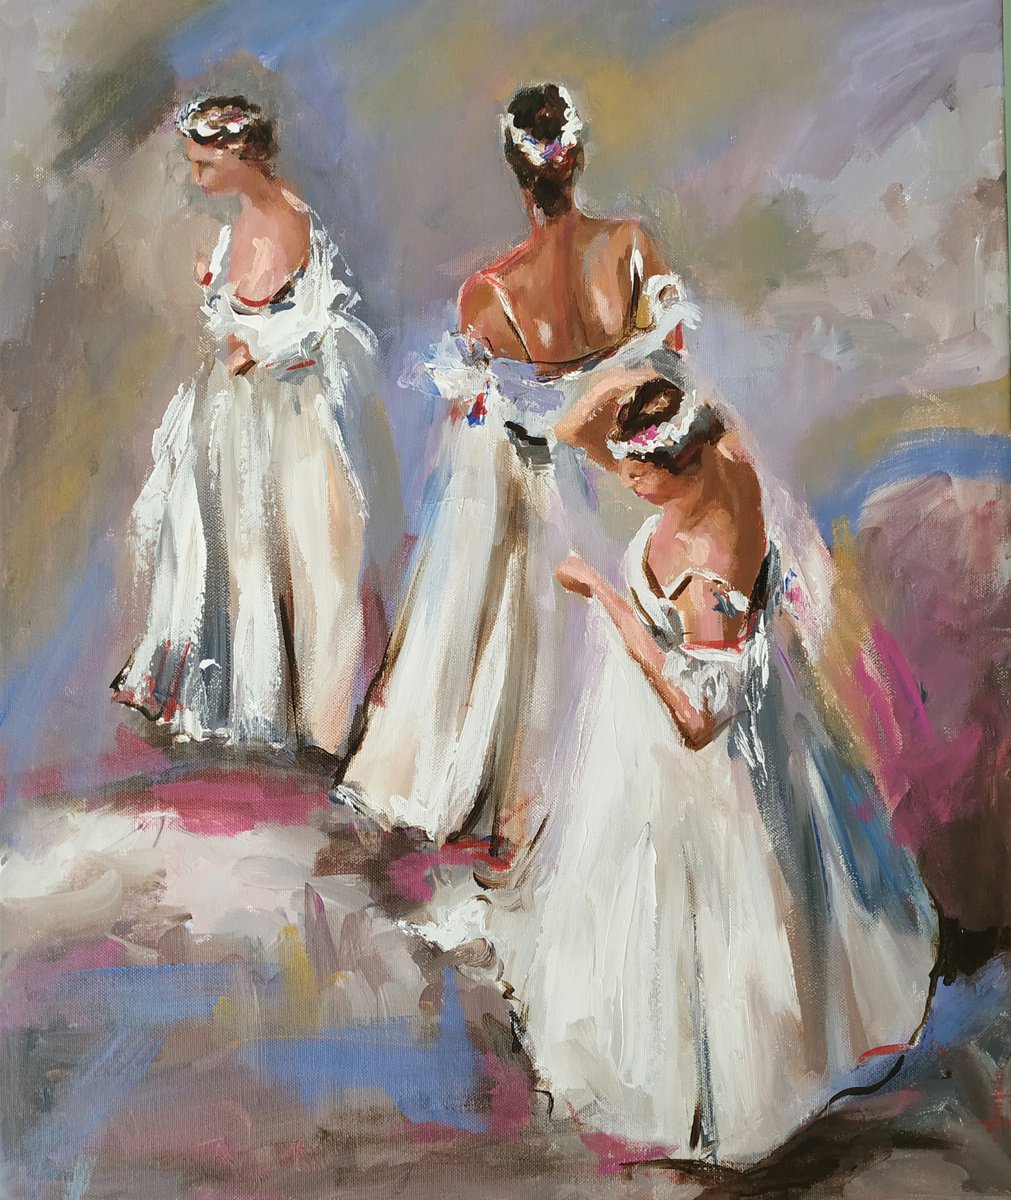 Behind the Scenes Ballerina painting-Ballet painting by Antigoni Tziora